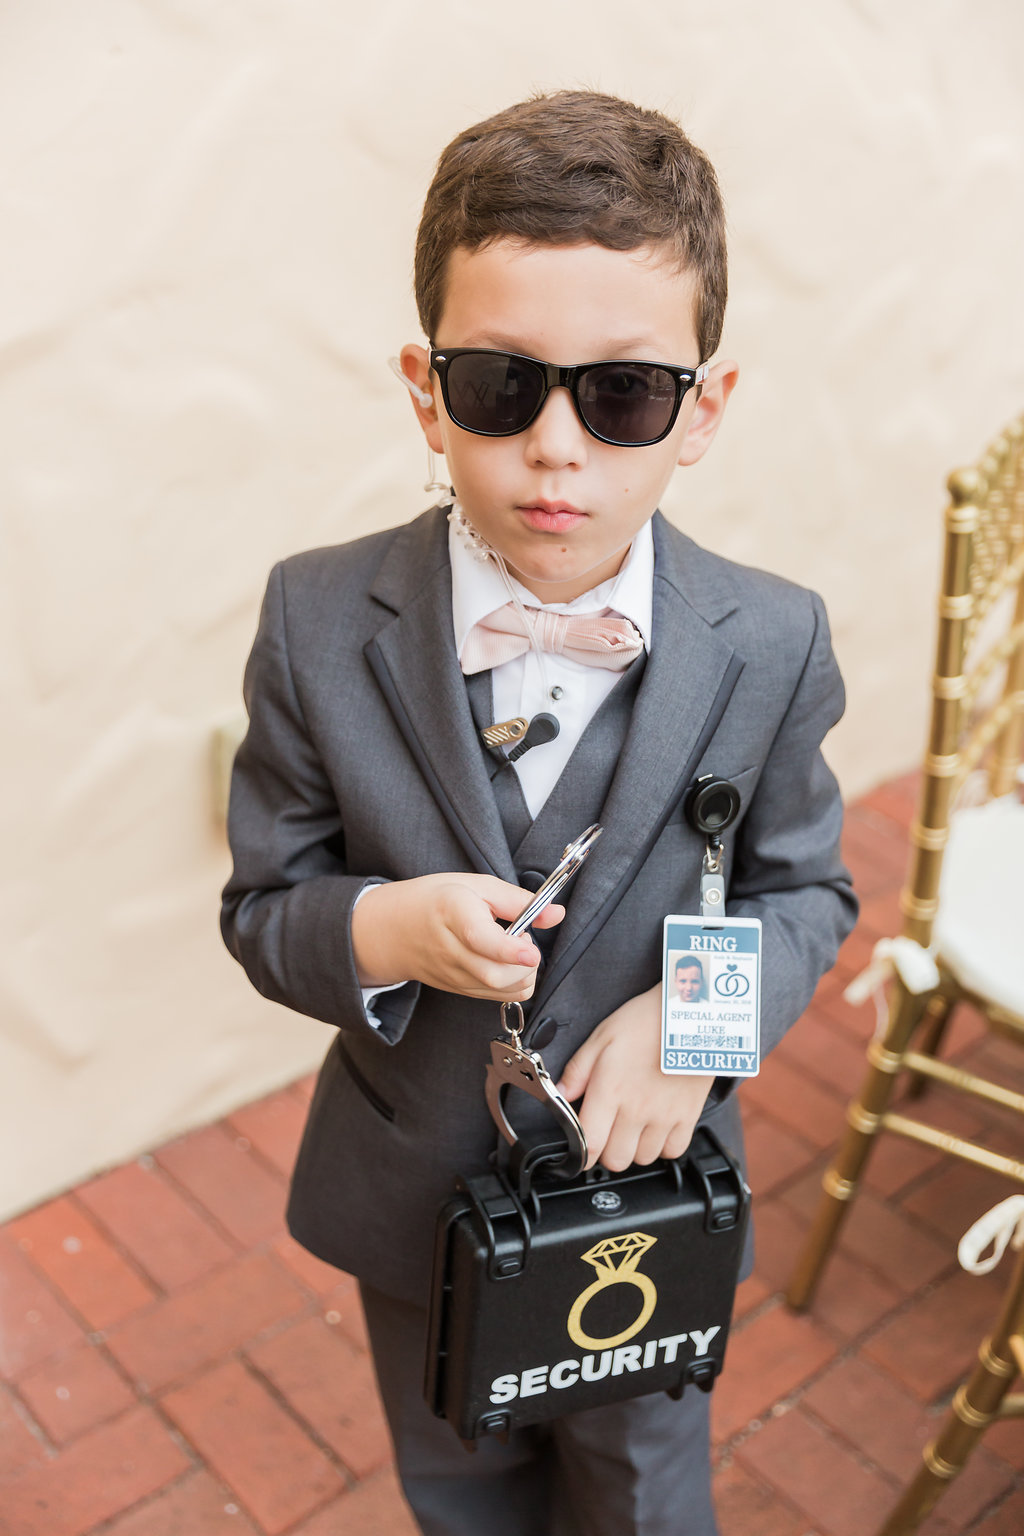 The ring bearer sported a ring security outfit complete with special agent sunglasses, an ear piece, handcuffs, and ring briefcase